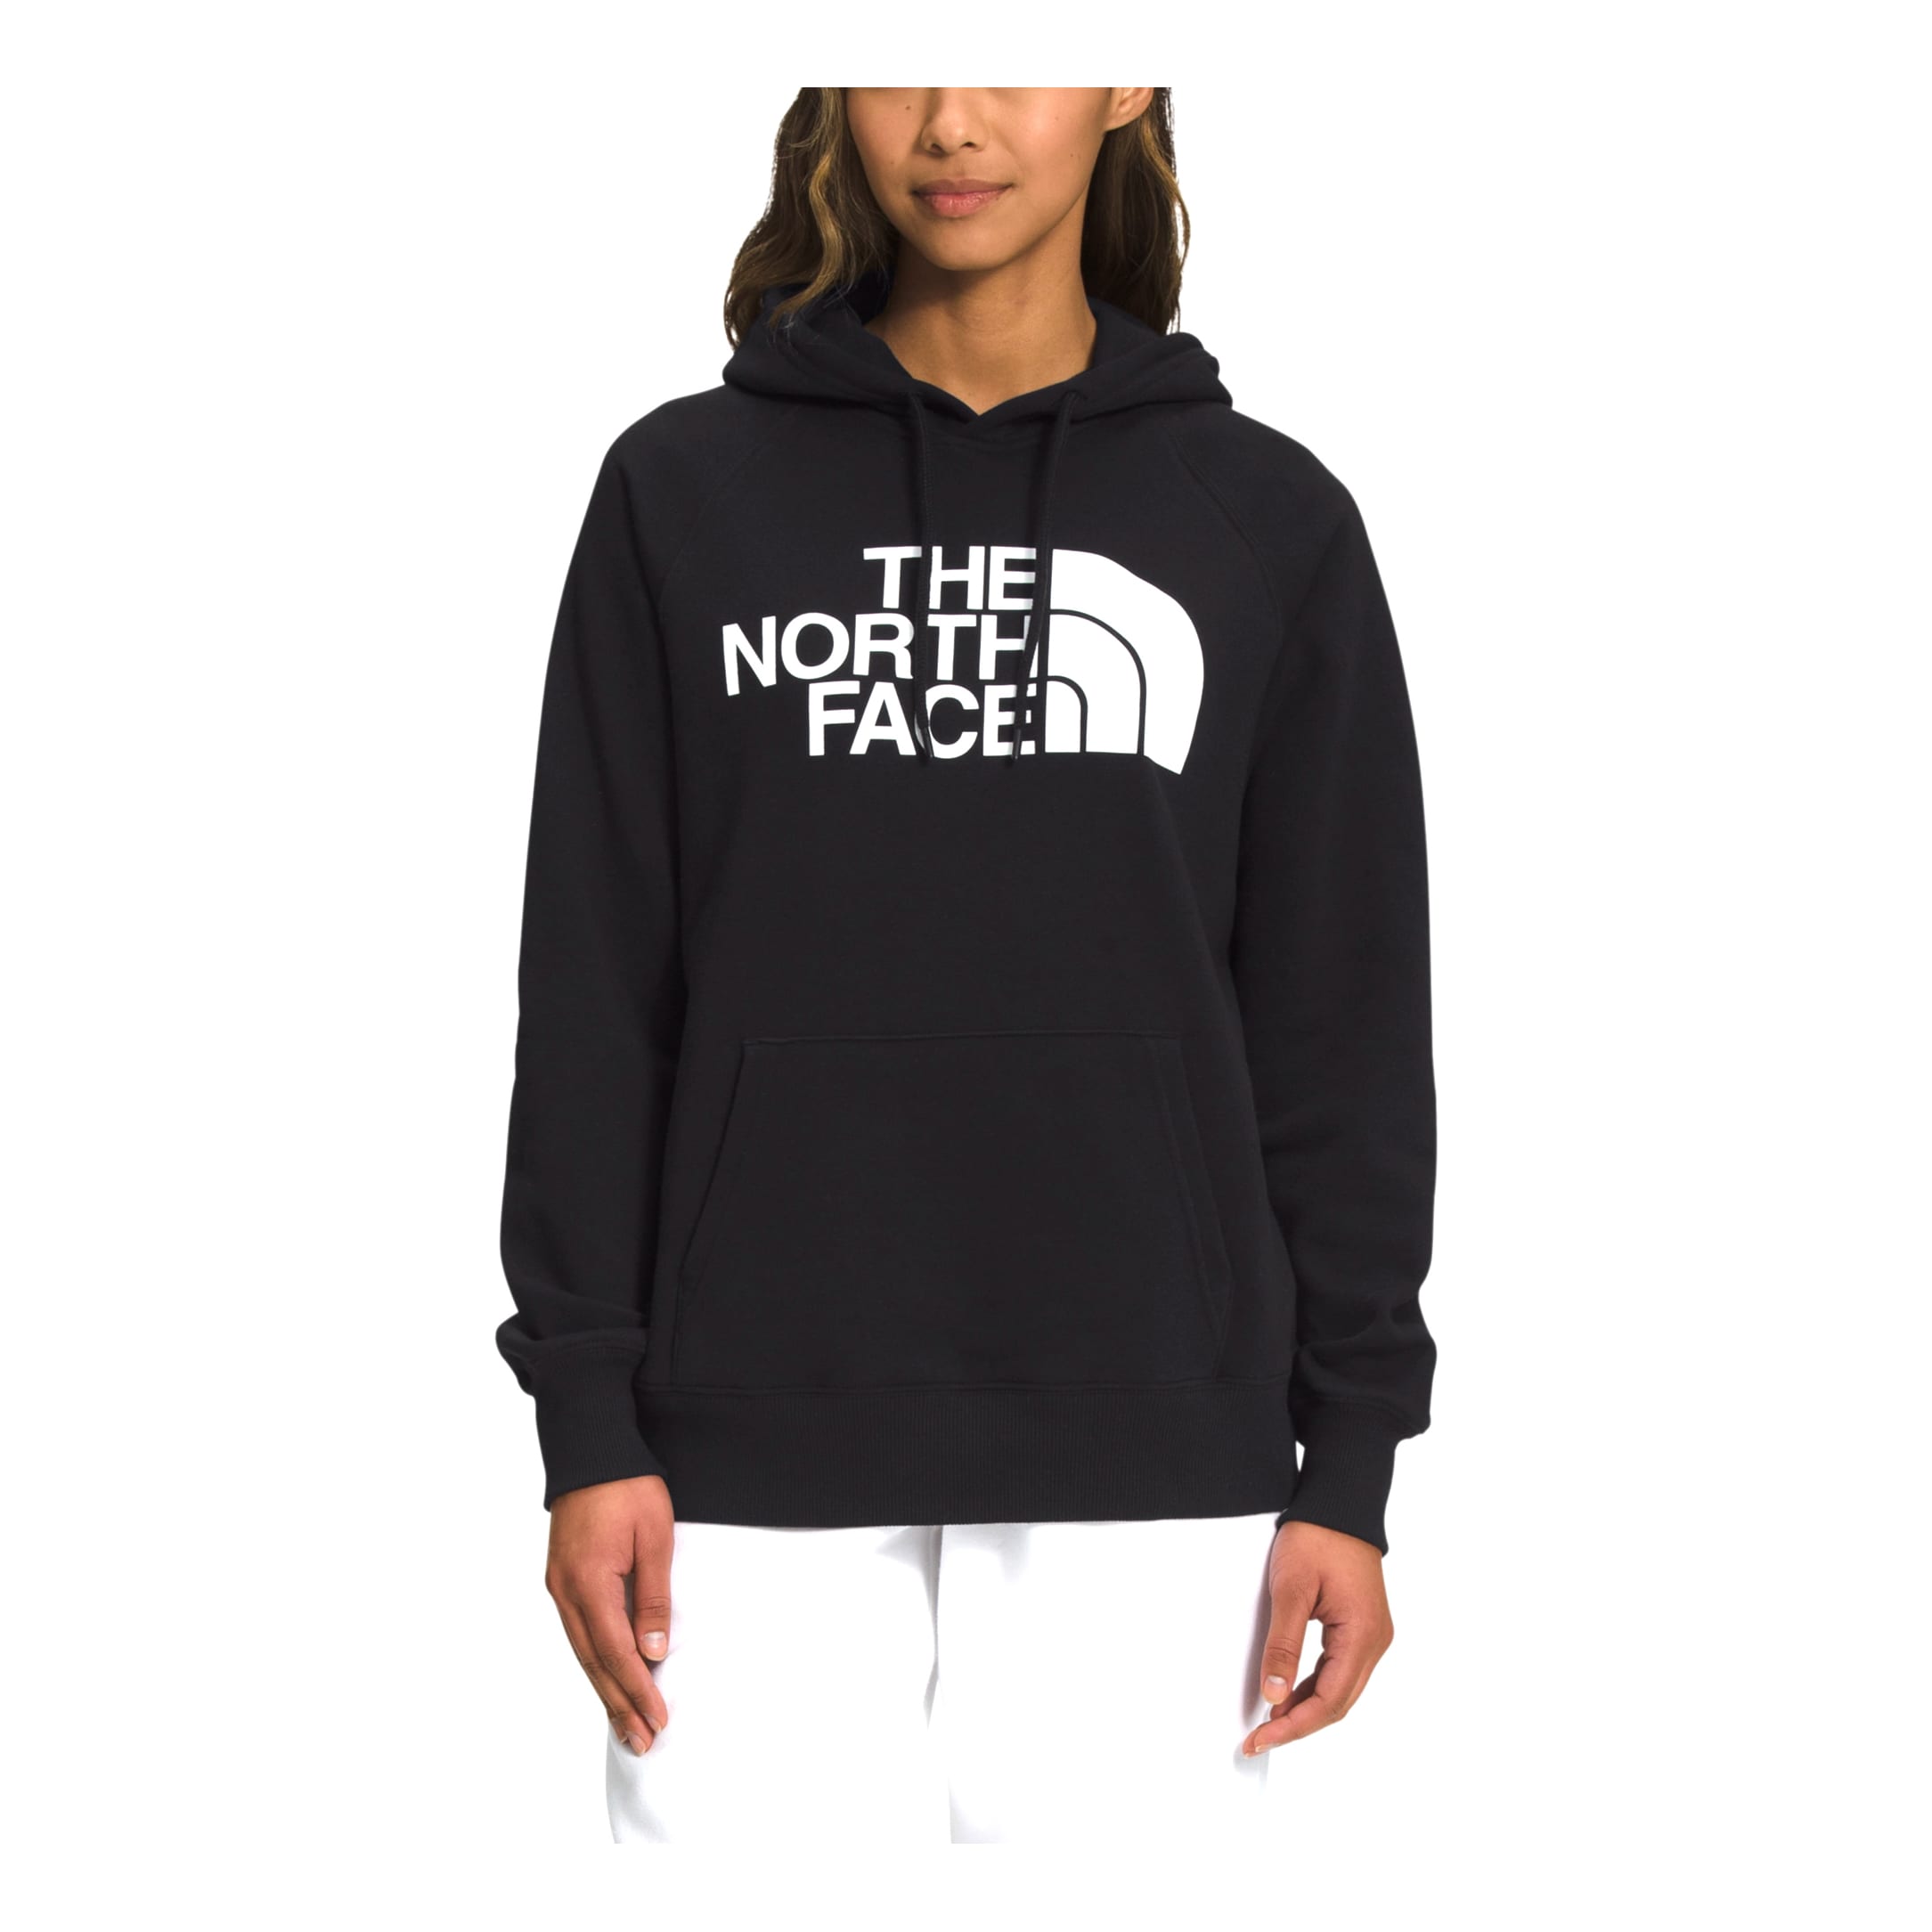 The North Face® Women’s Half Dome Hoodie - TNF Black